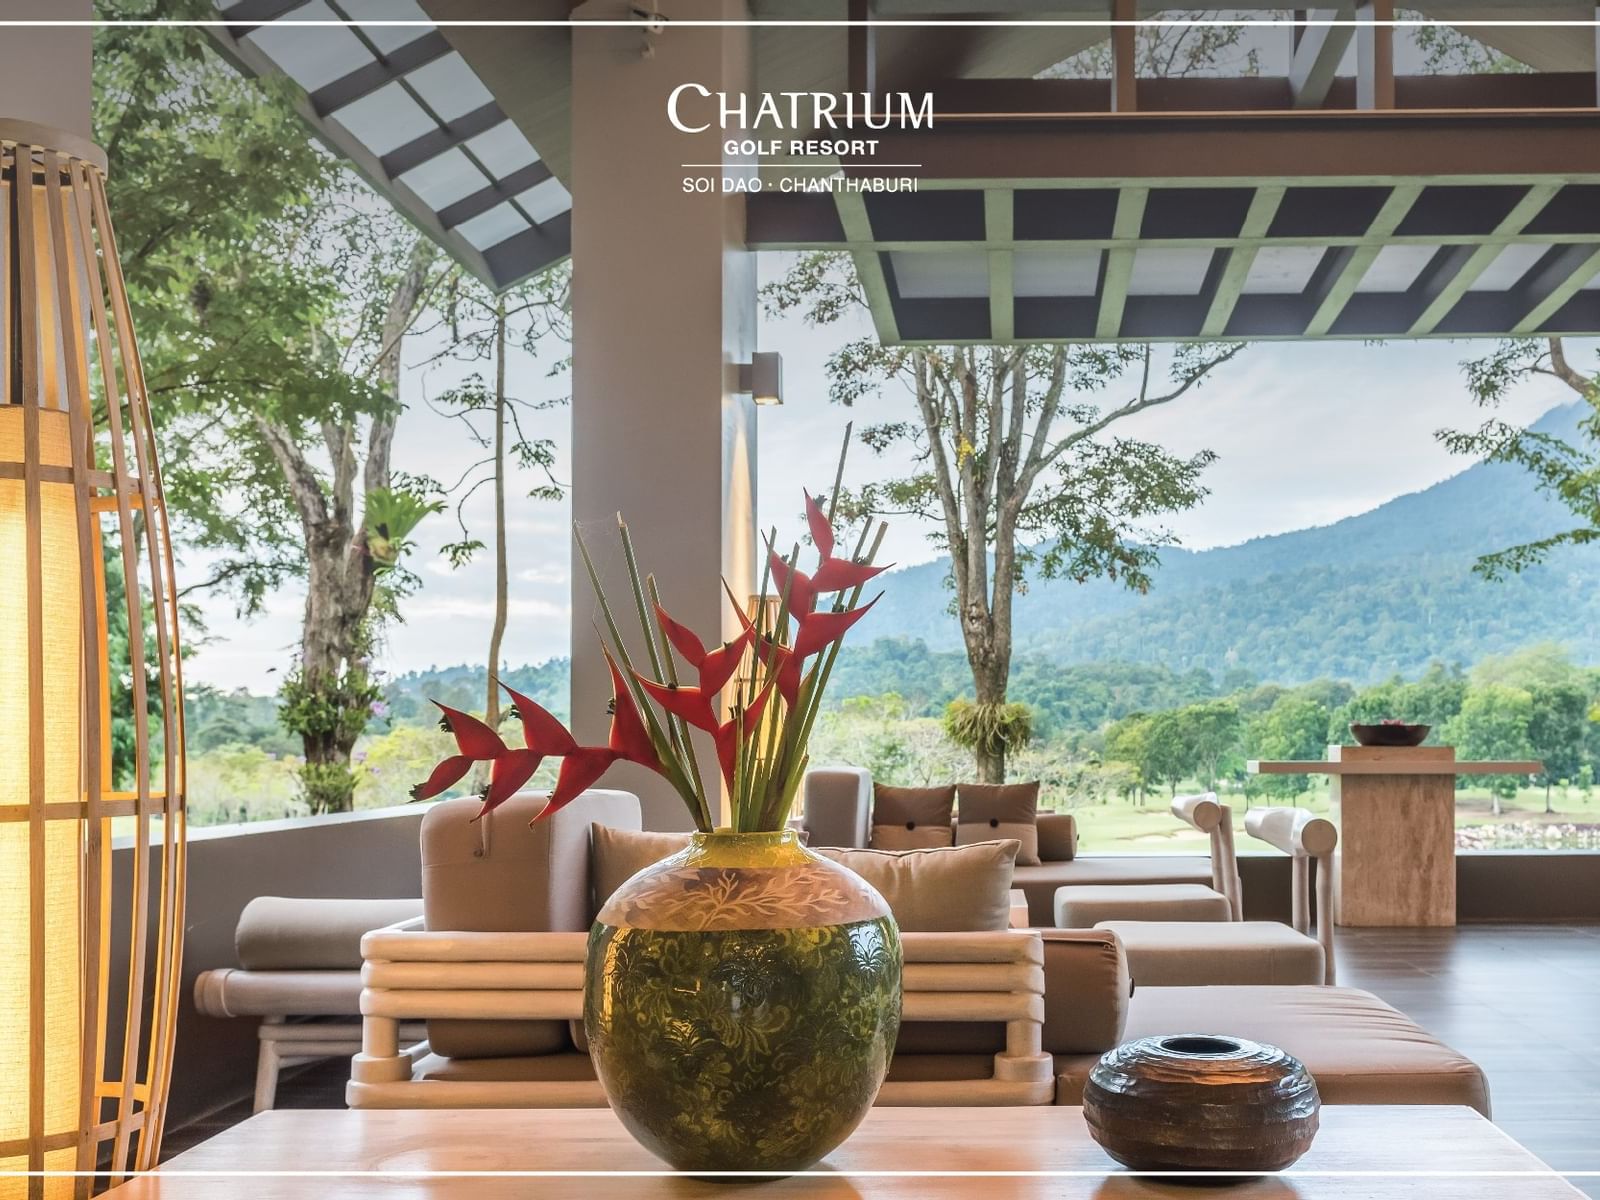 Banner of Chatrium Resort with a lobby area background